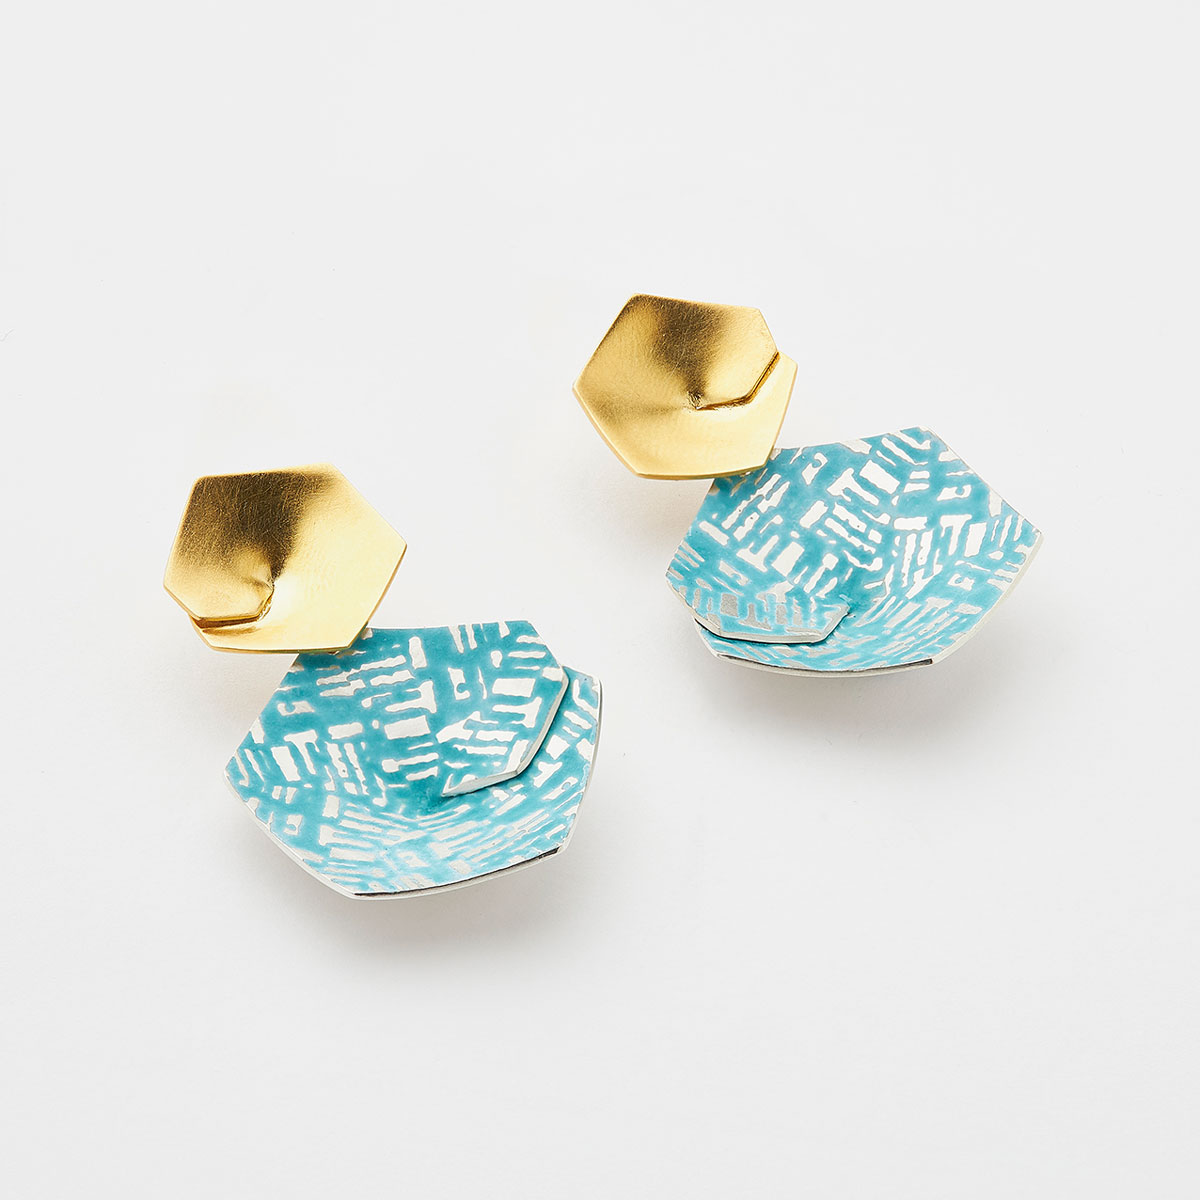 ‘Weave’ Gold and Turquoise Hexagonal Drop Earrings